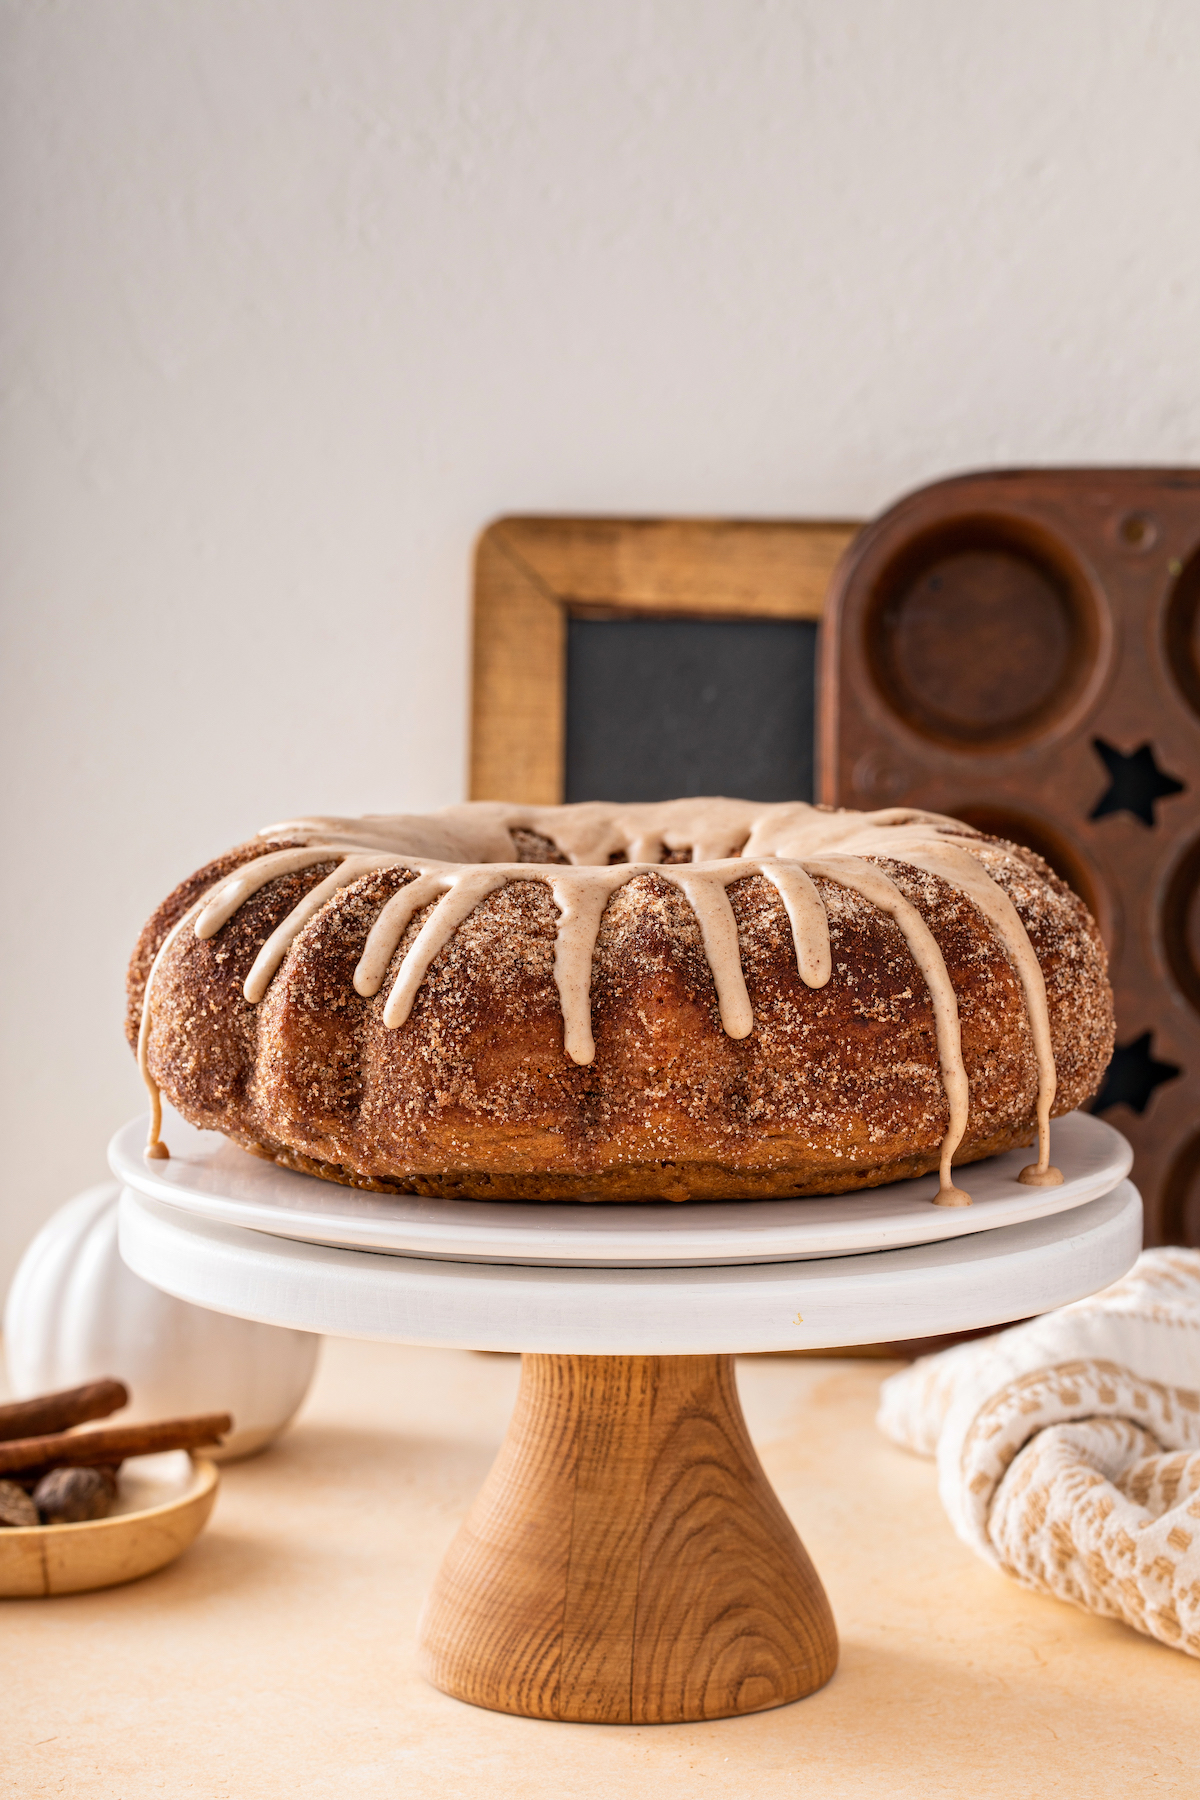 A cake stand holding a pumpkin spice bundt cake coated in cinnamon sugar and topped with glaze.